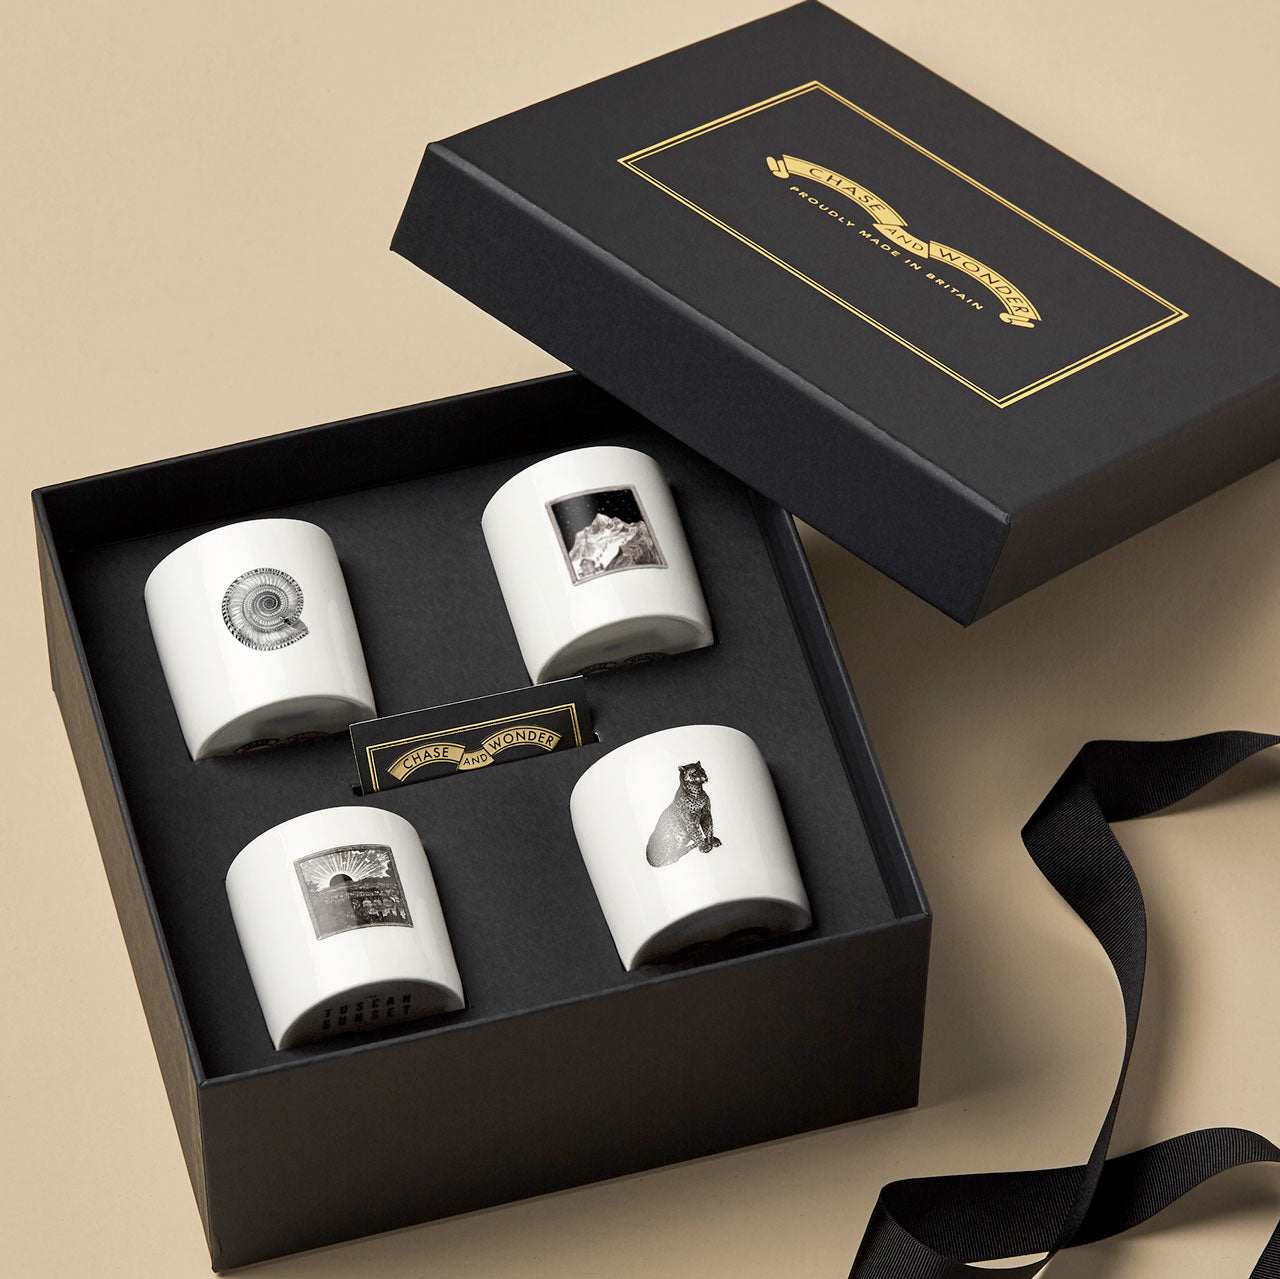 The Globe Trotter's Discovery Candle Set